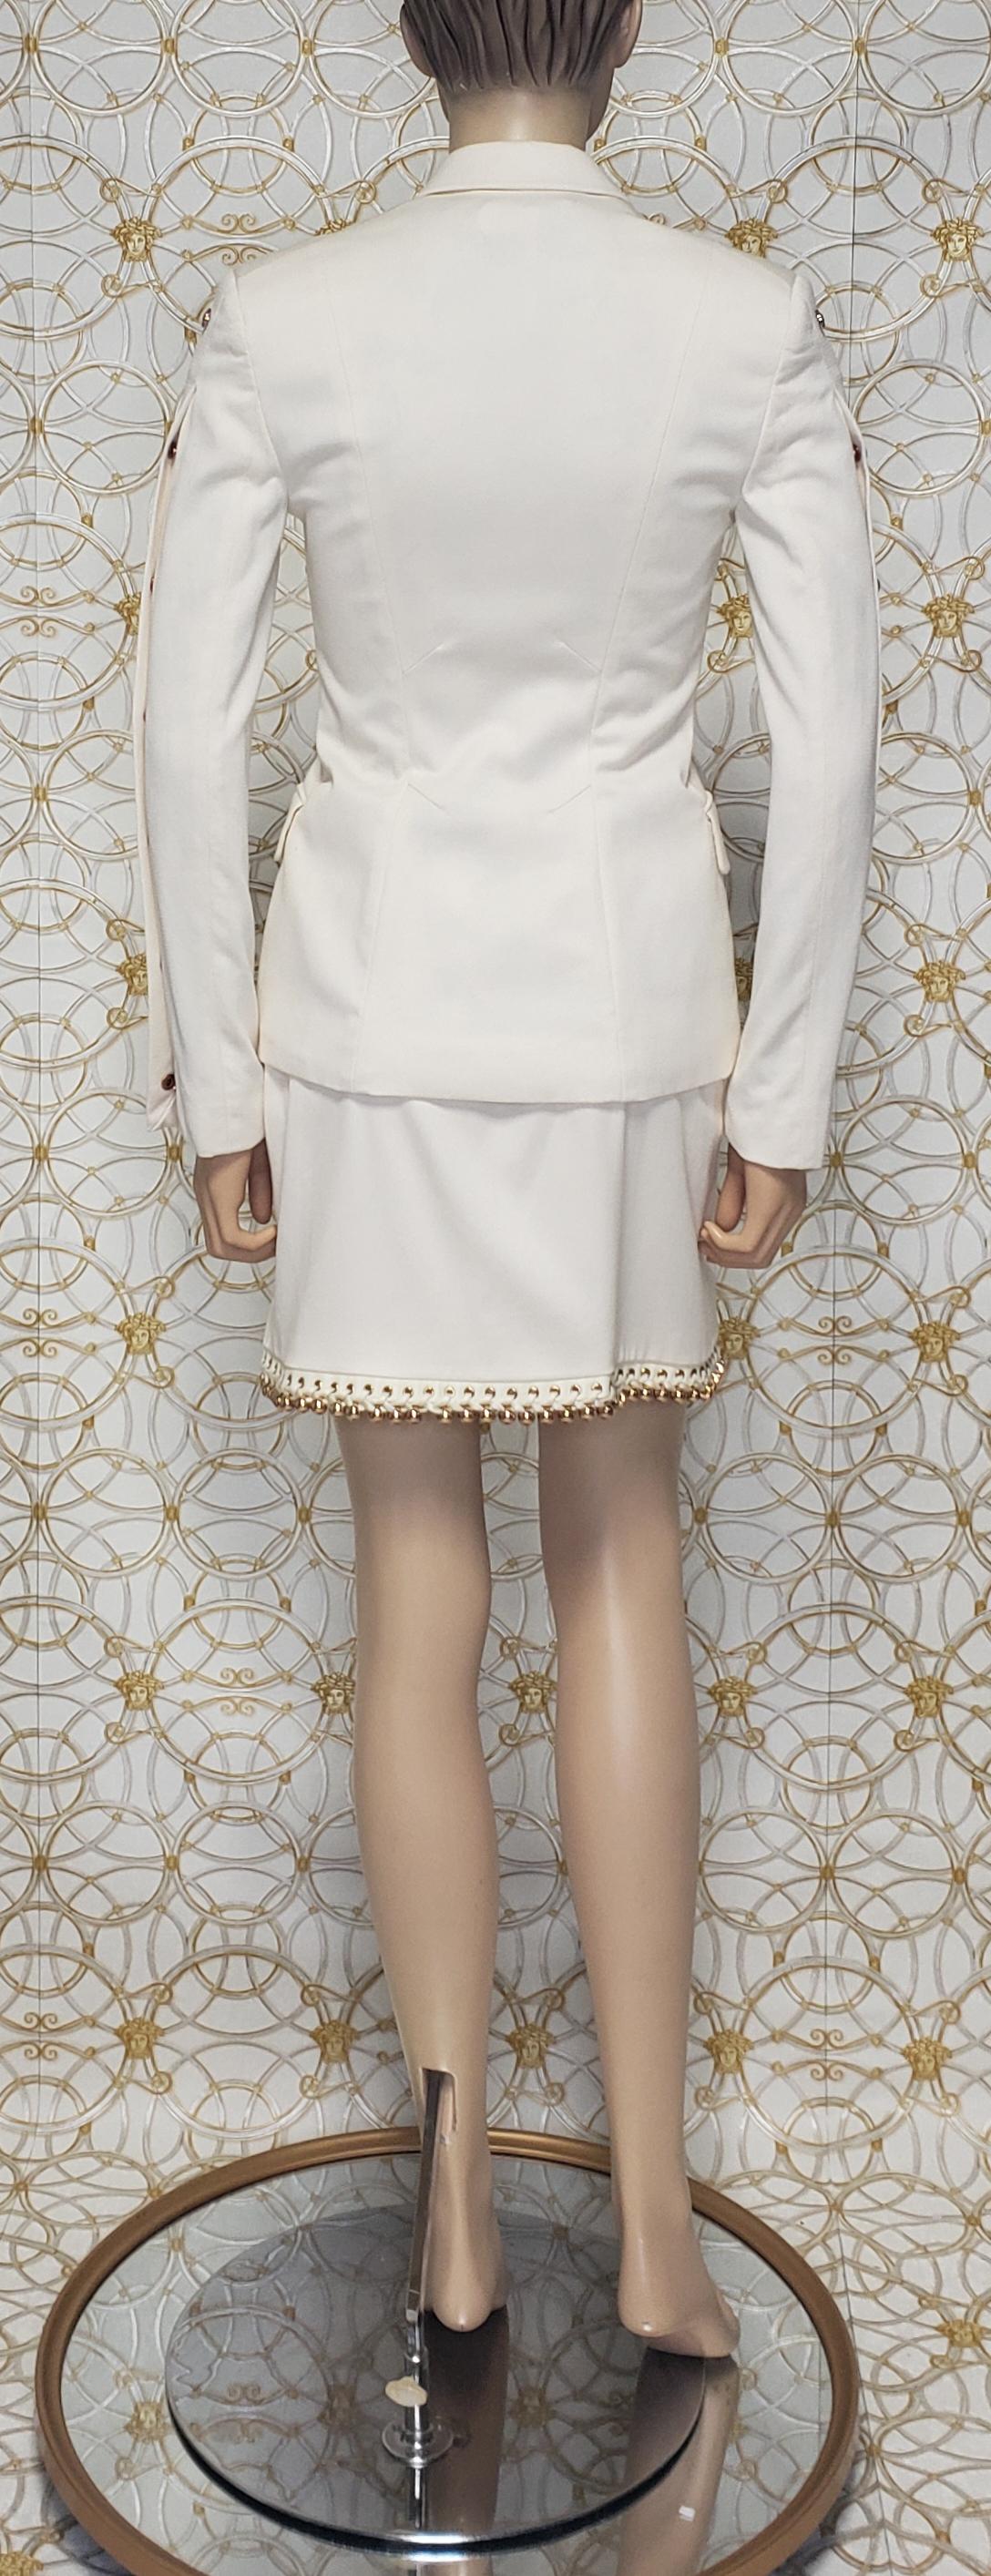 Resort 2013 look #1 NEW VERSACE OFF WHITE COTTON SKIRT SUIT For Sale 2